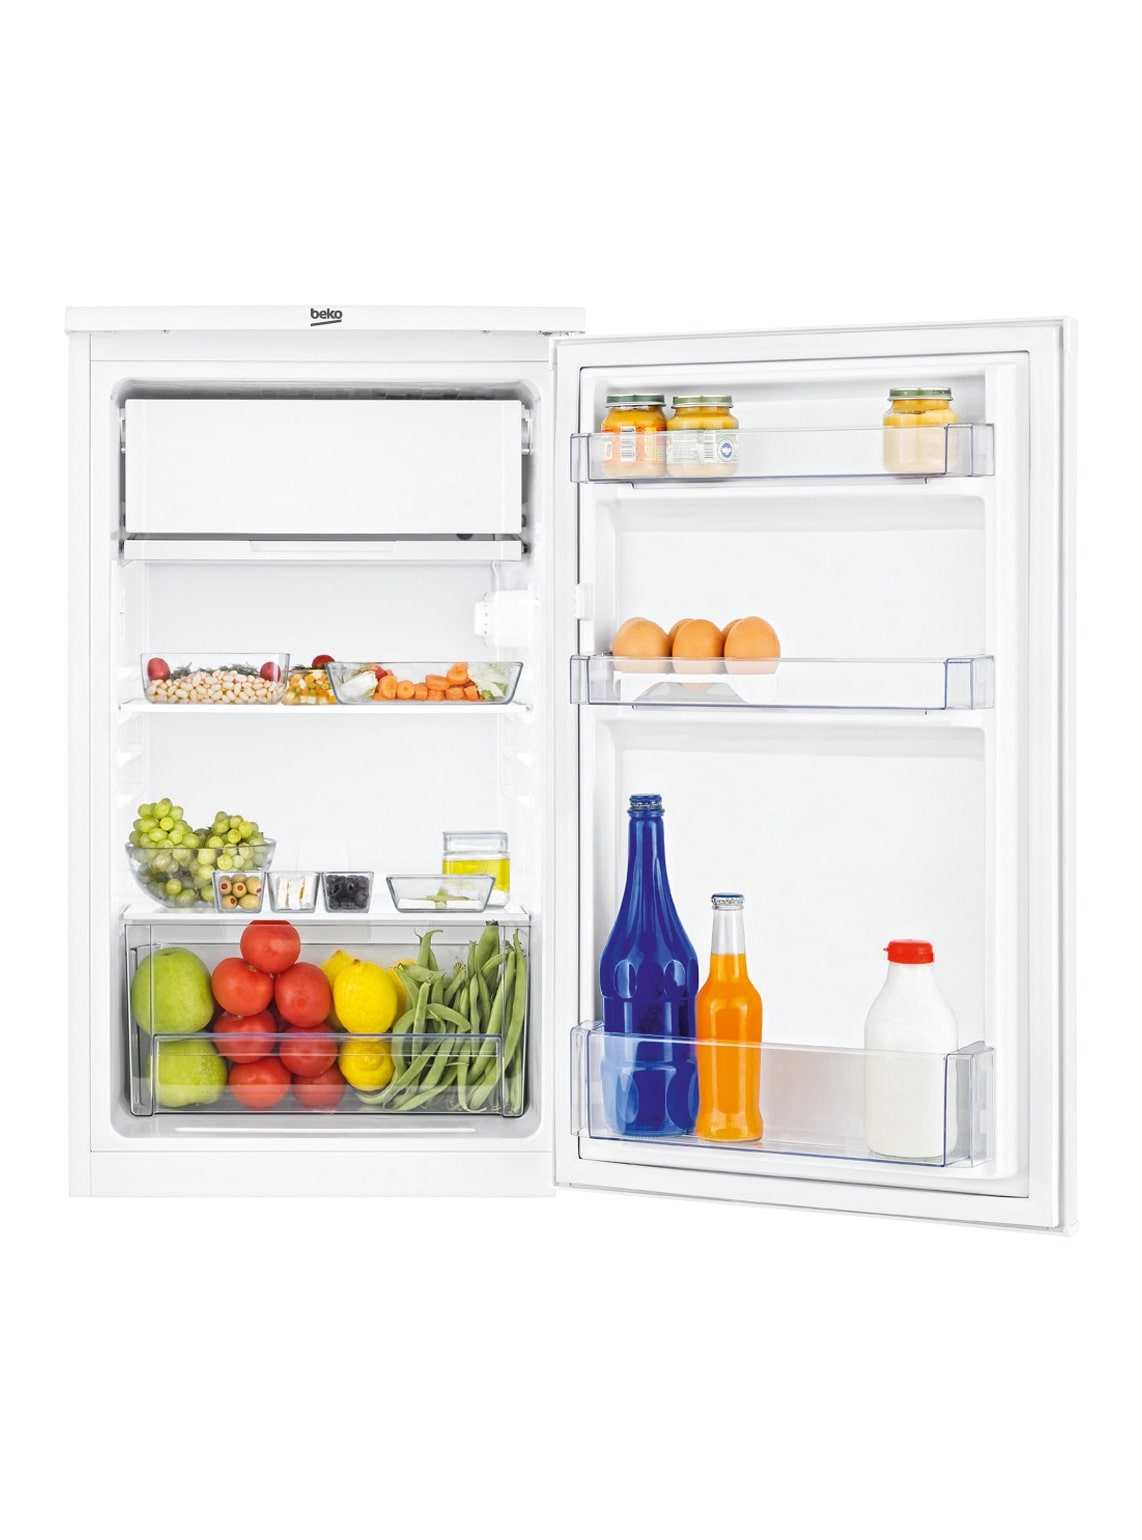 Beko office refrigerator, capacity of 86 liters, white color, with freezer